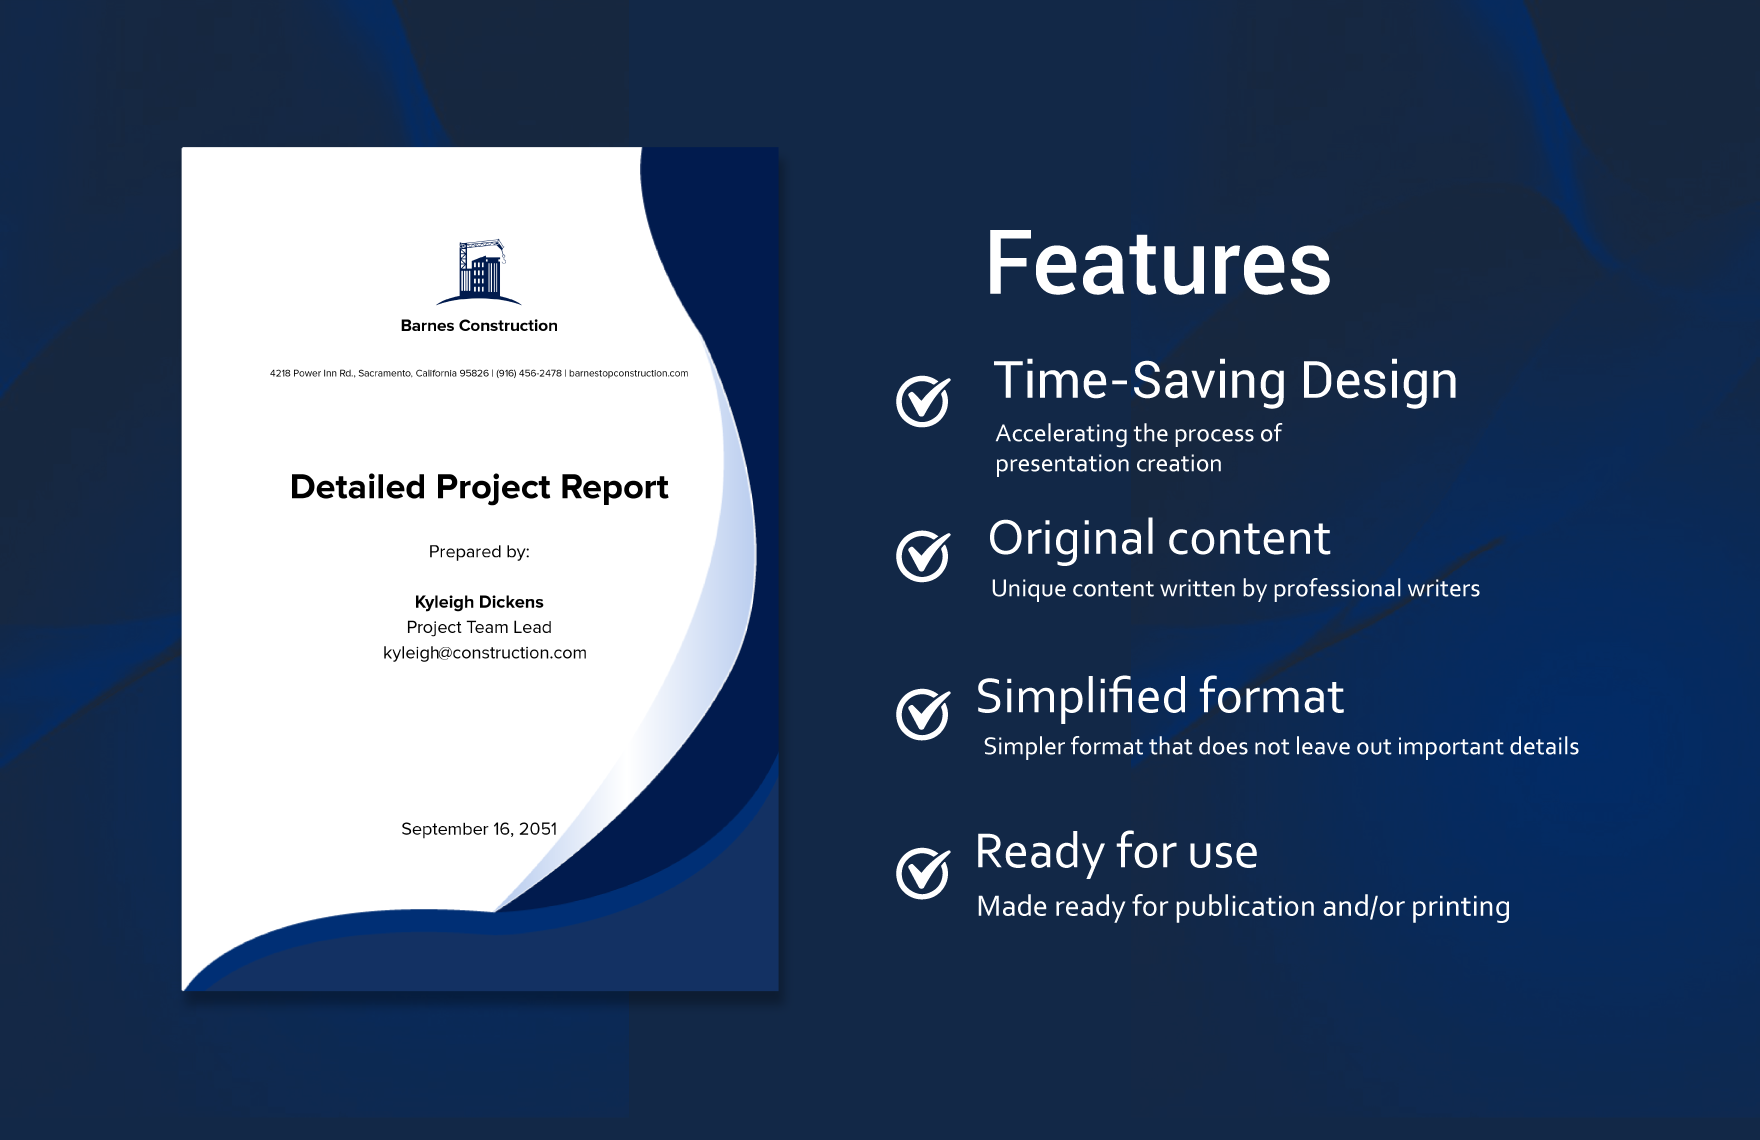 Detailed Project Report Template